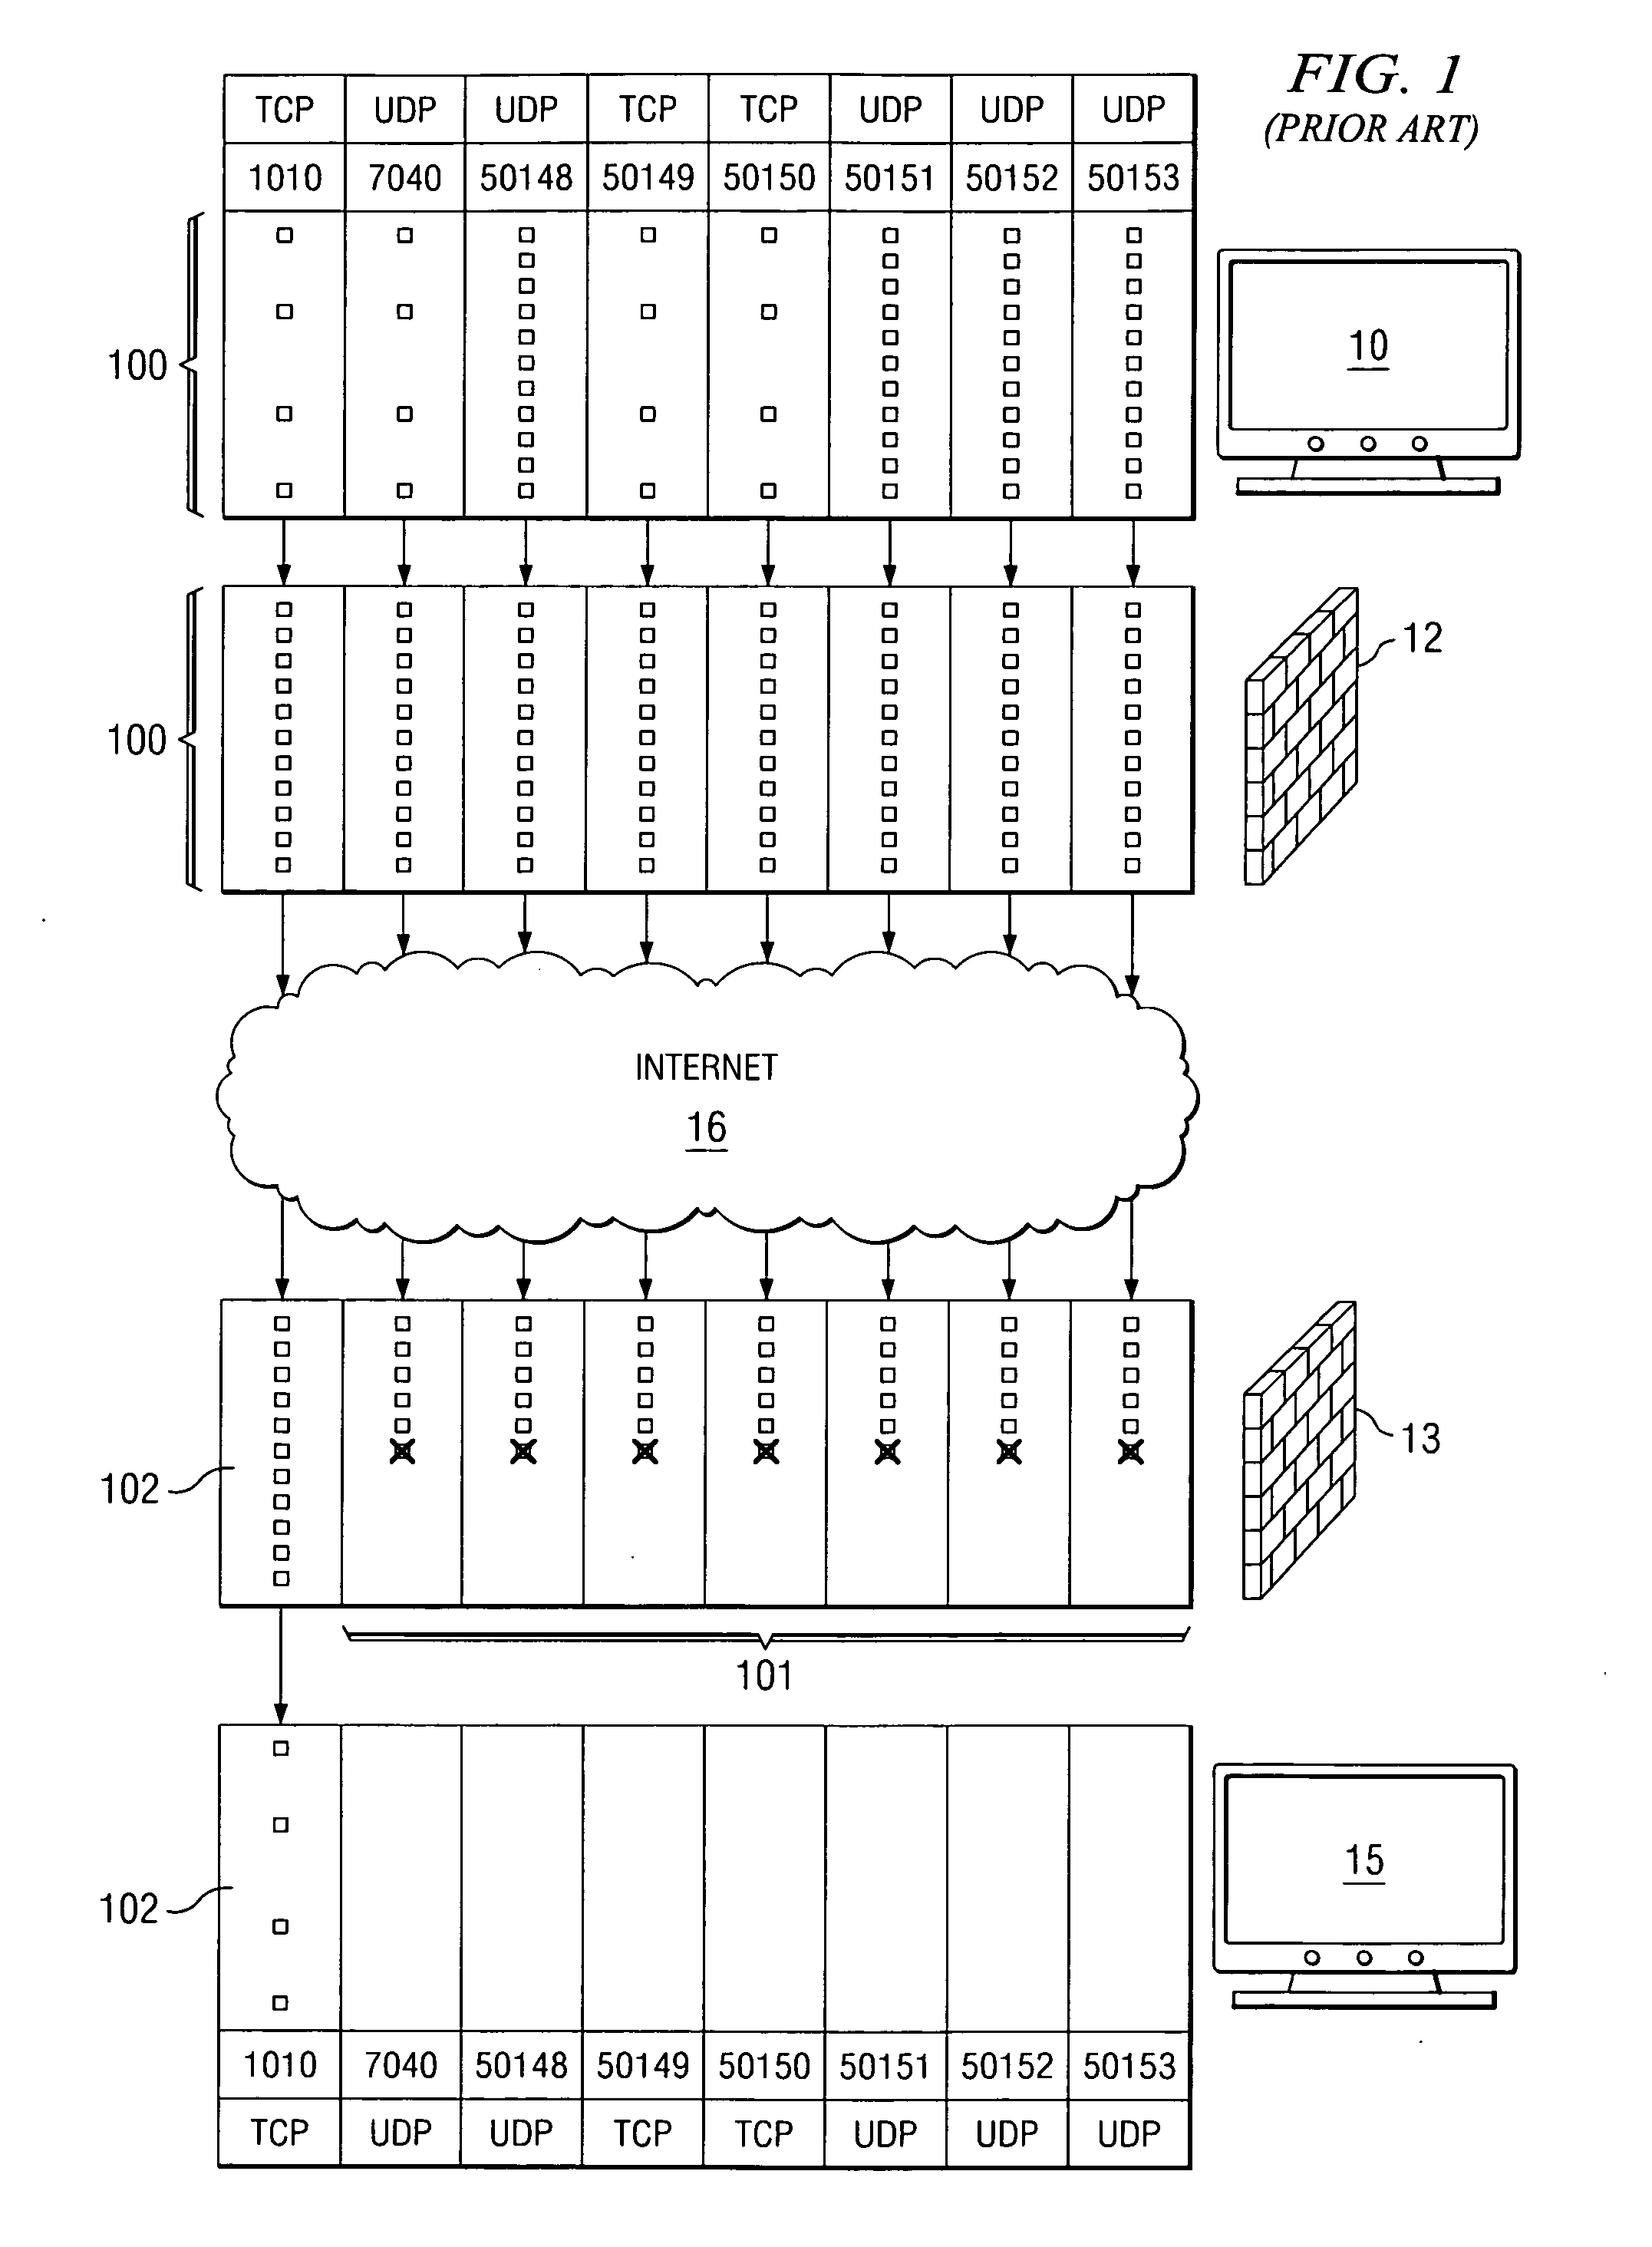 System and method for traversing a firewall with multimedia communication